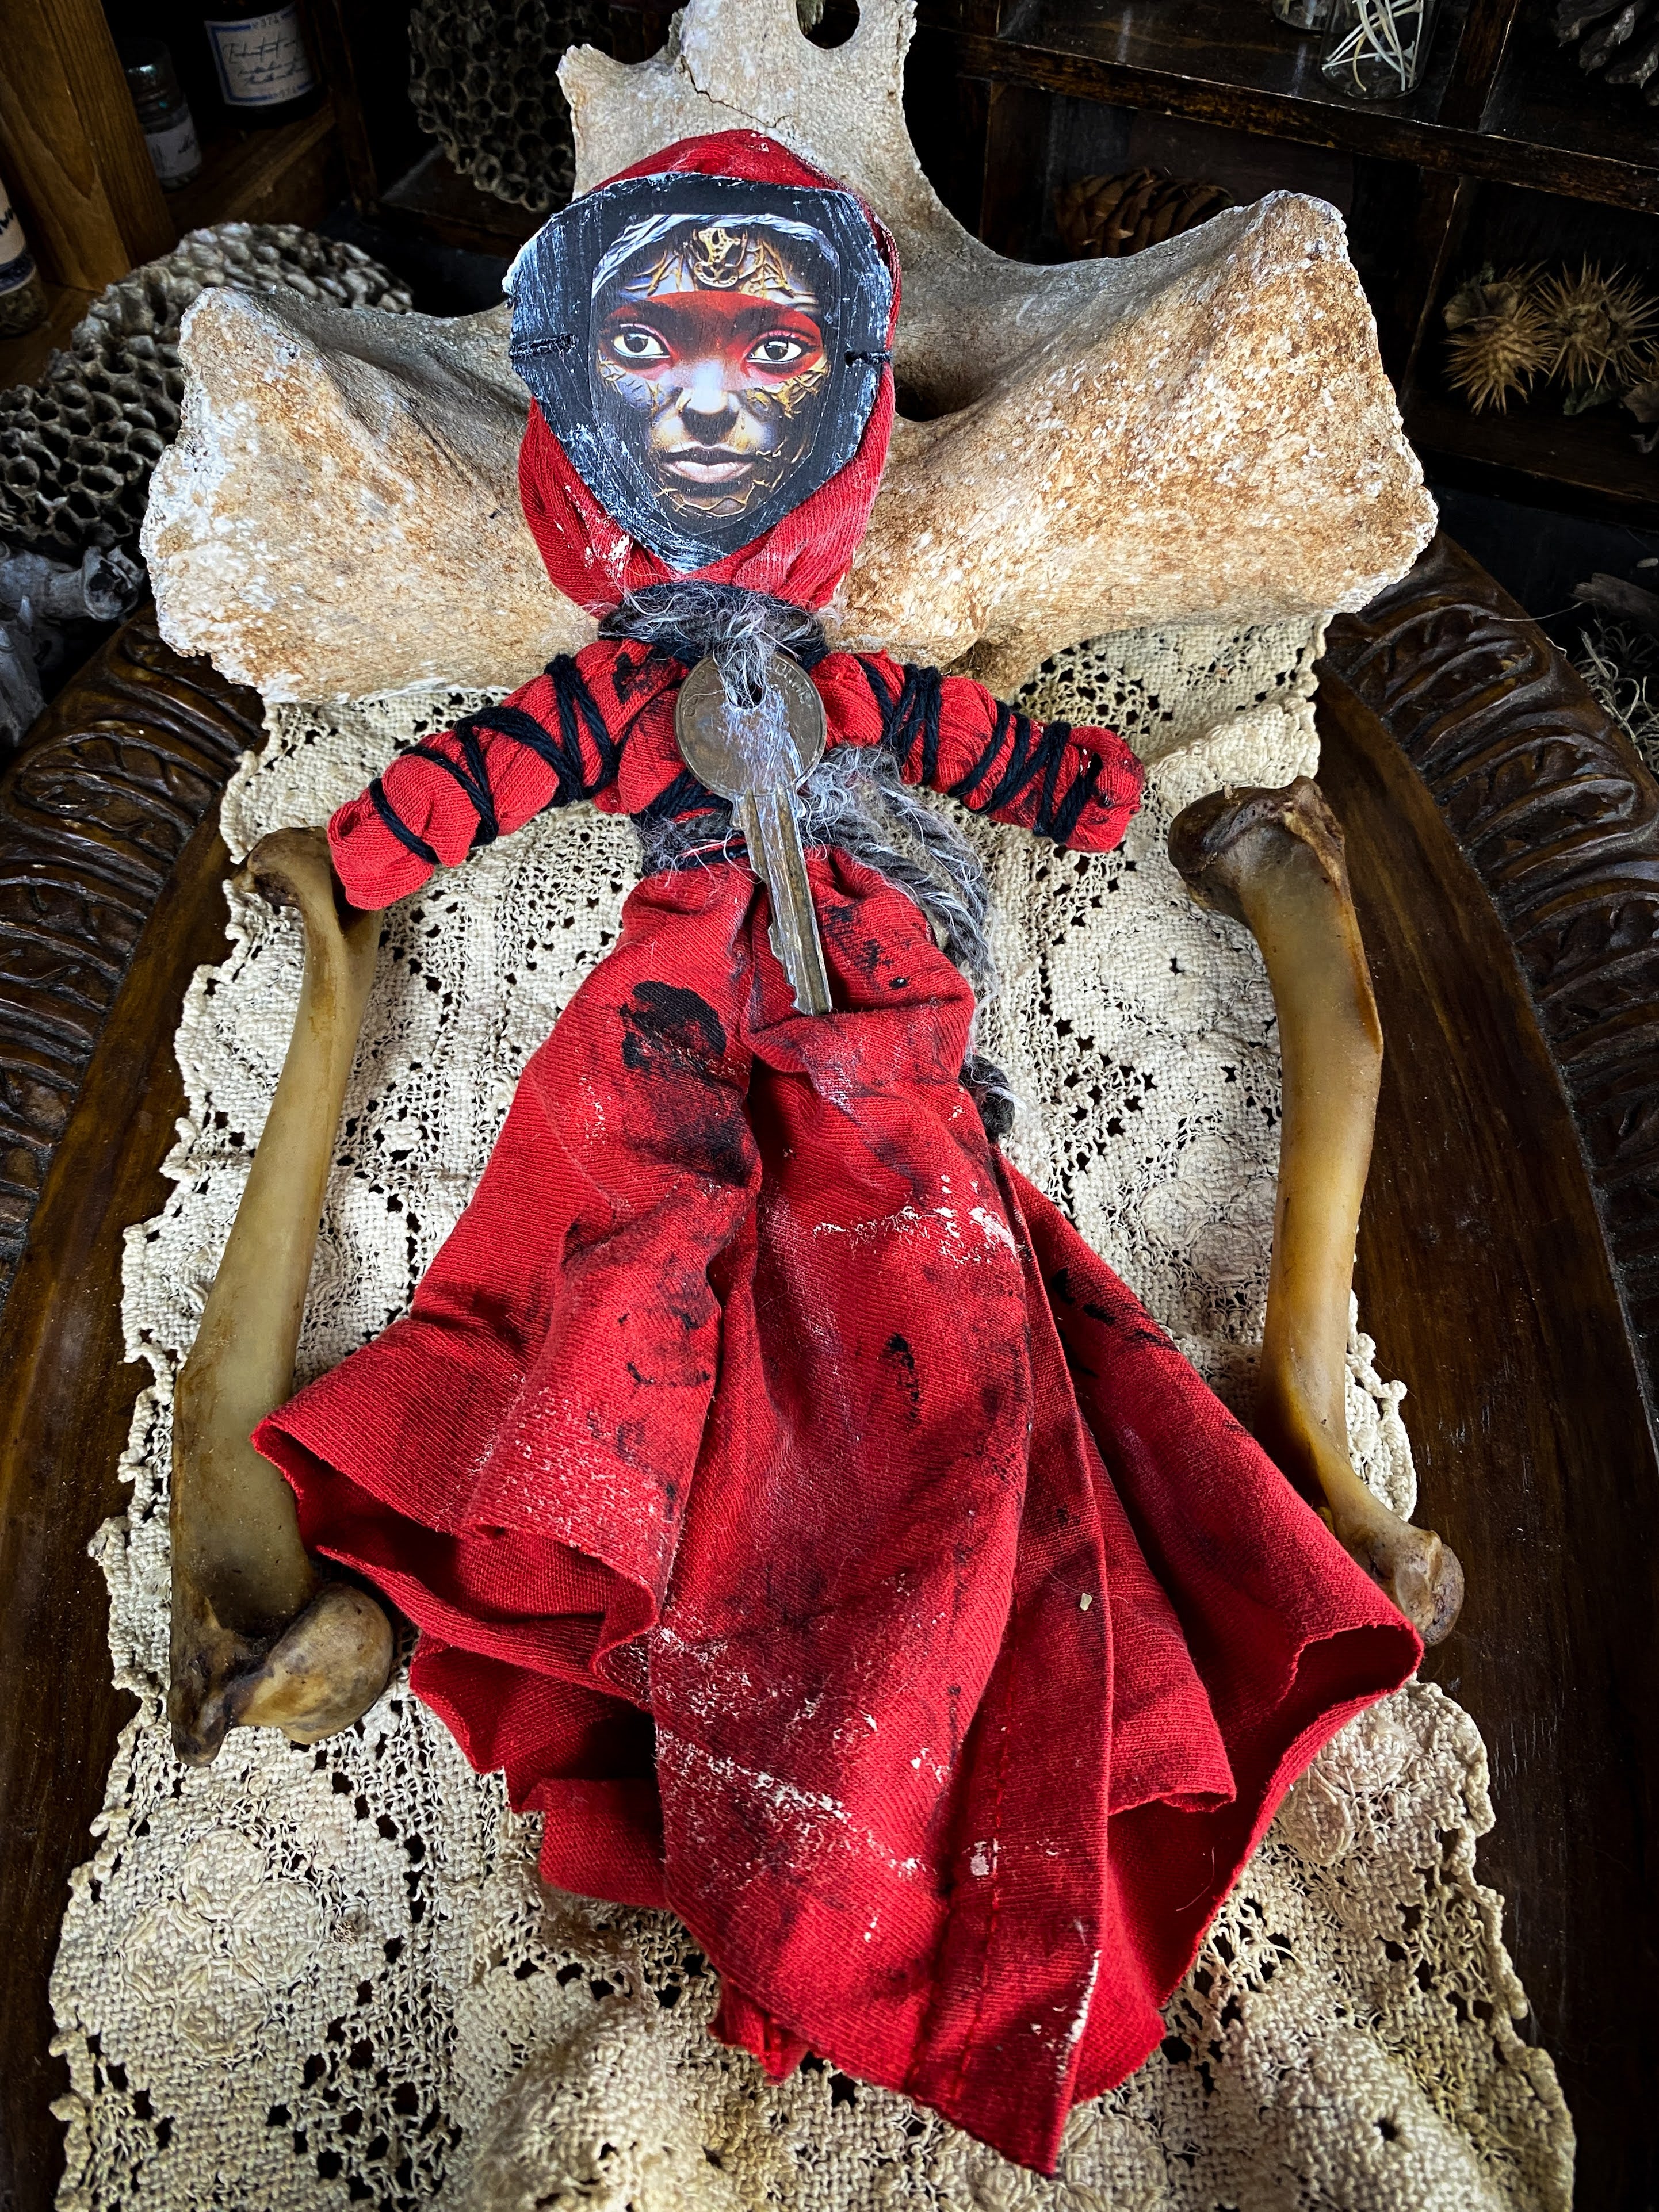 Intention Doll Containing Herbs, Roots, Stones, Snake Skin, Shells - Poppet, Conjure Doll, Medicine Doll, Spirit Doll